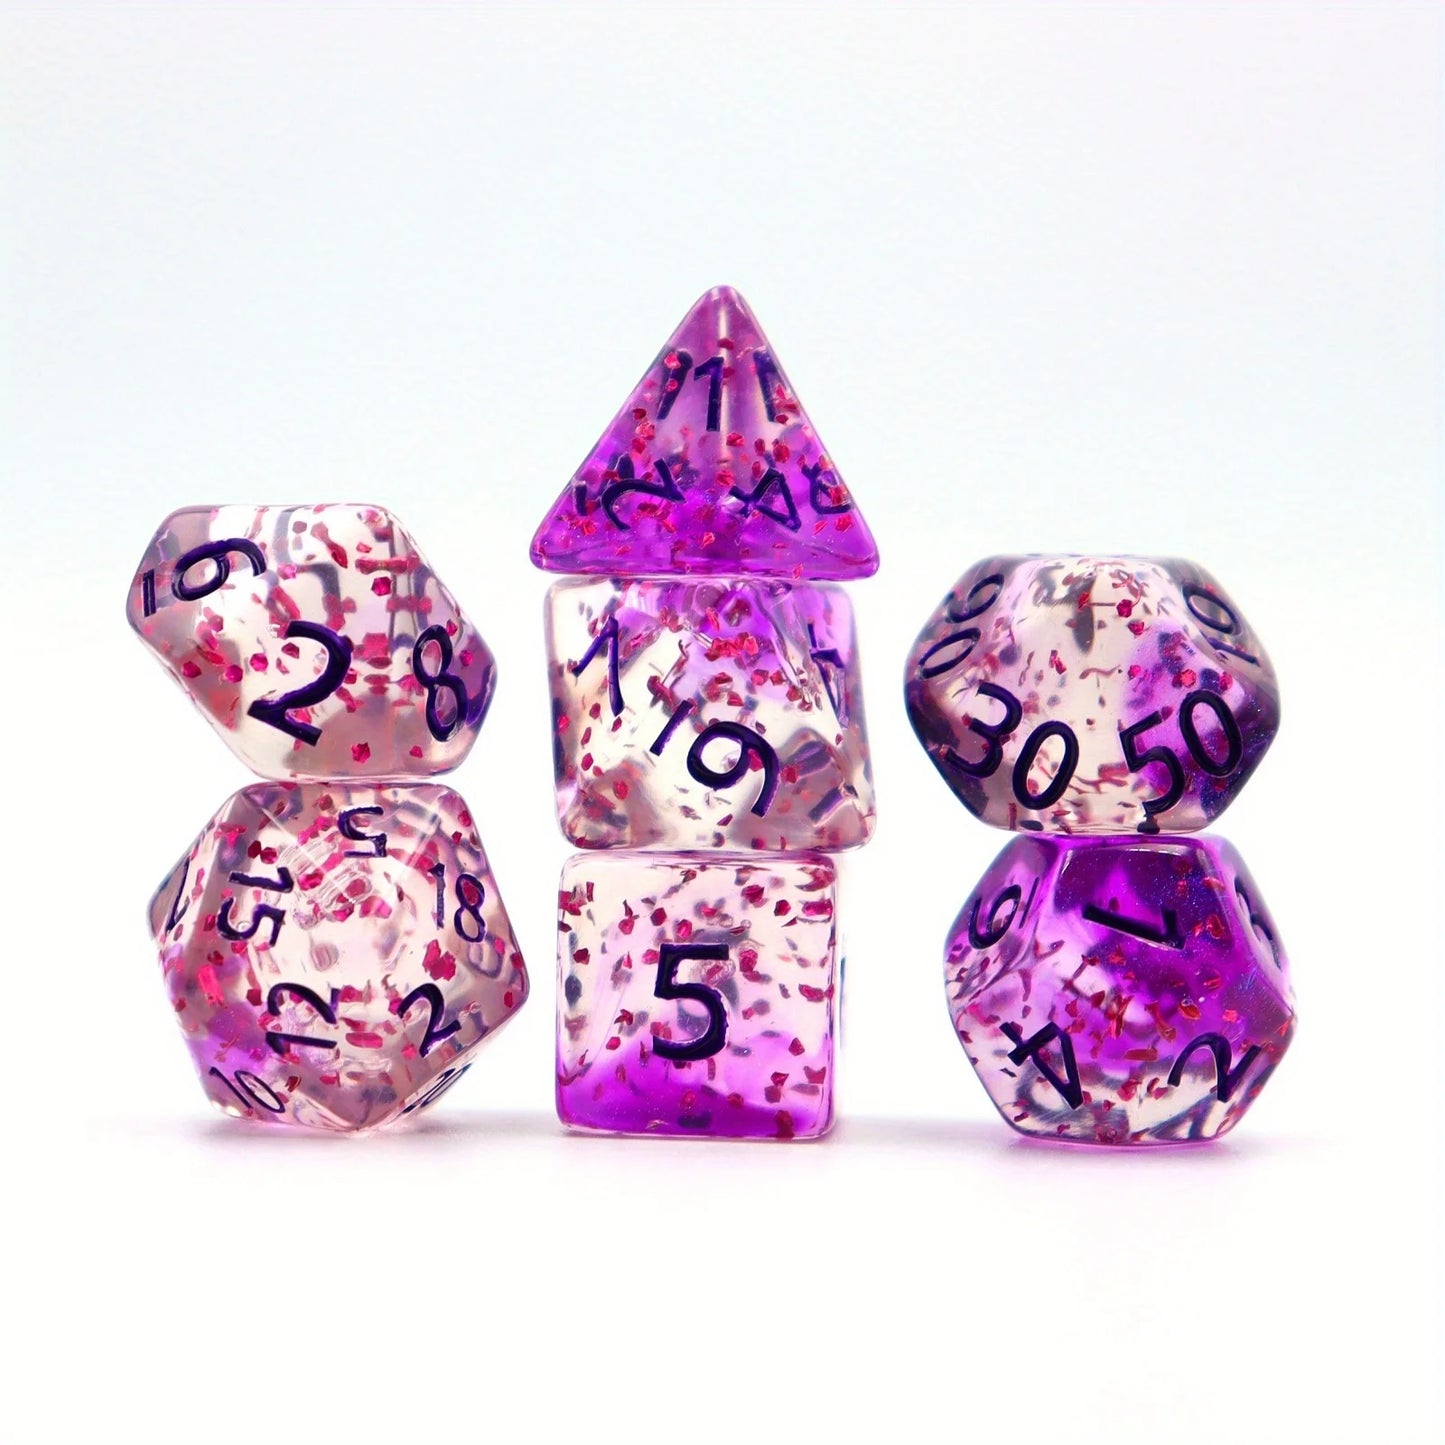 7pcs Set Crystal Style DND Dice Set, Polyhedral Table Game Dice Role-Playing RPG Dice With Box PURPLE